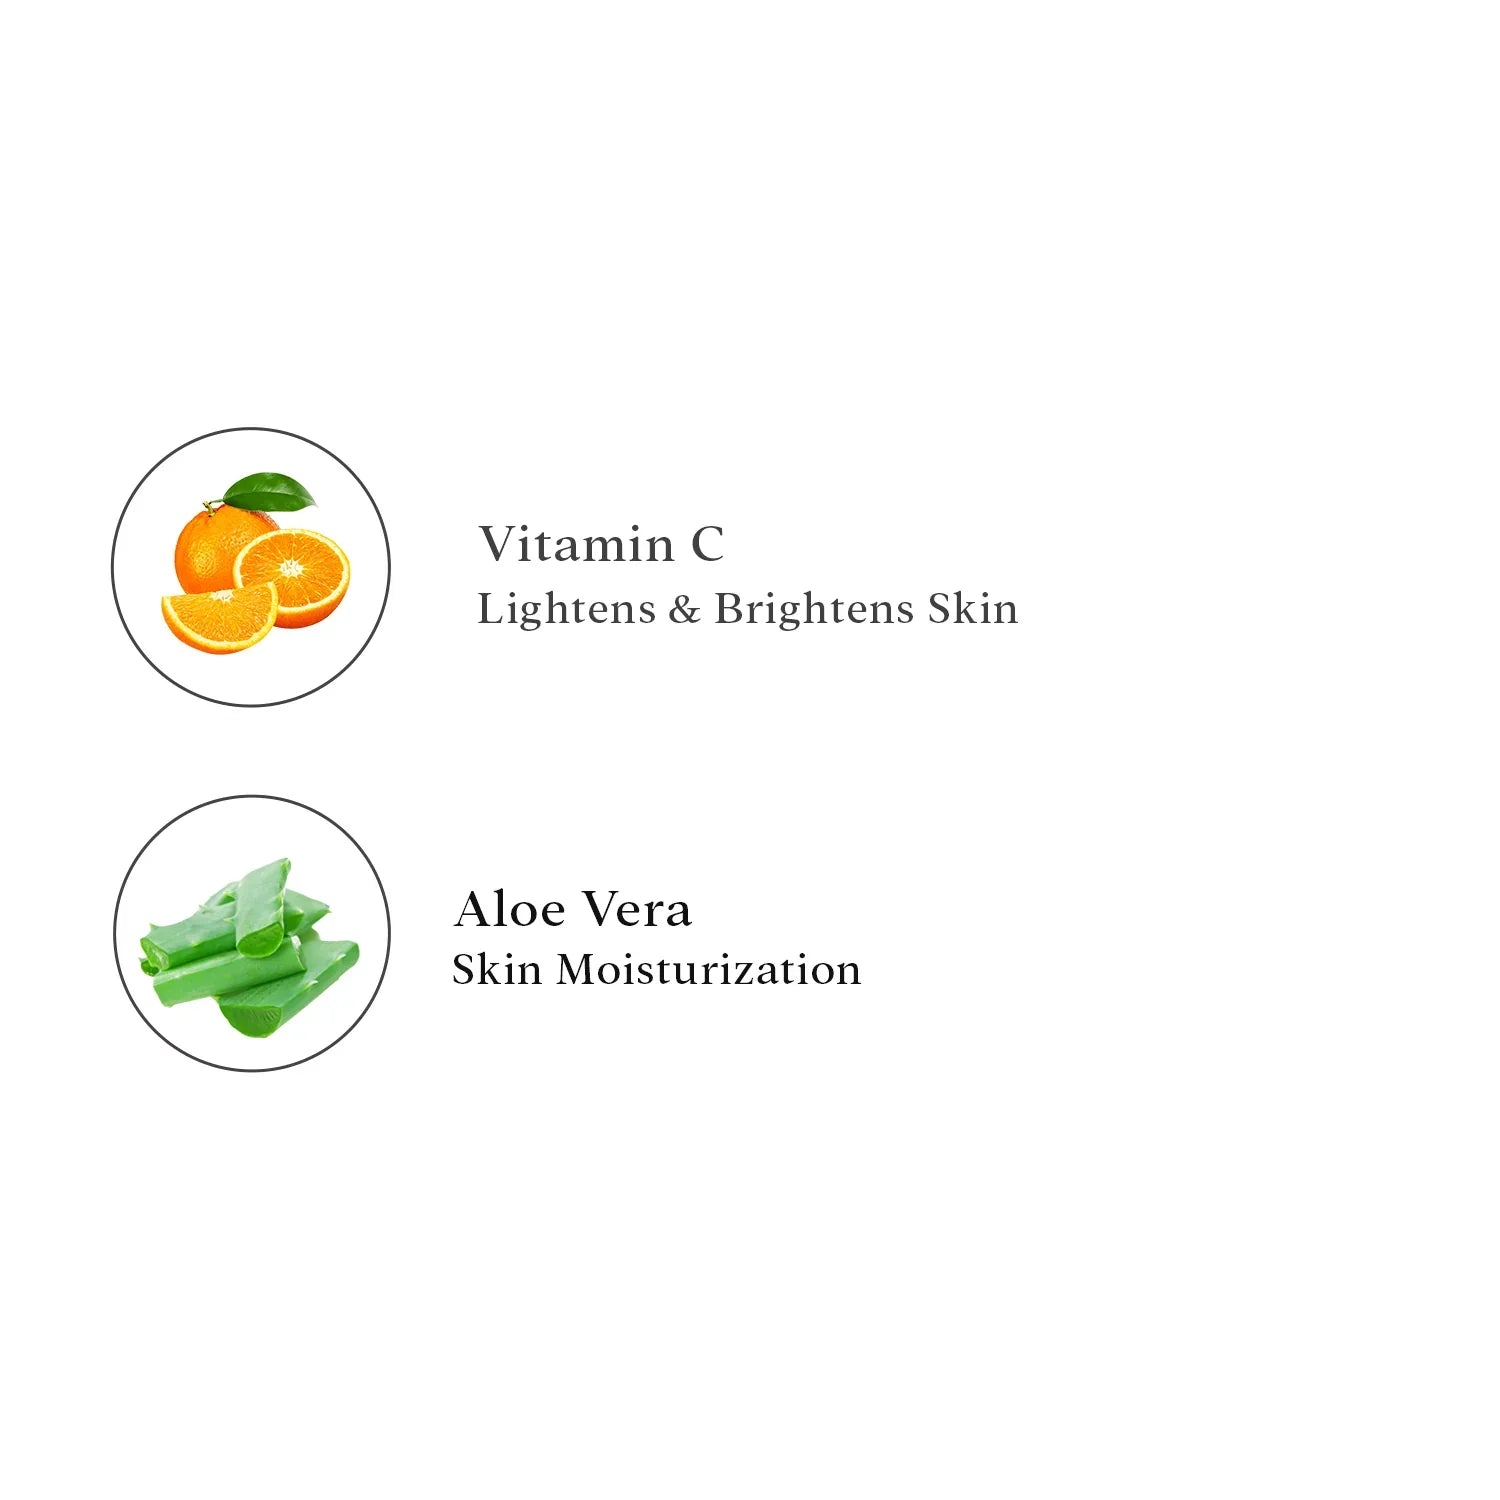 O3+ Agelock Vitamin C Booster Serum Facial Antioxidant for Sun Damage Repair & Even Skin Tone Enriched with Orange Peel, 30gm Moisturizer from O3+